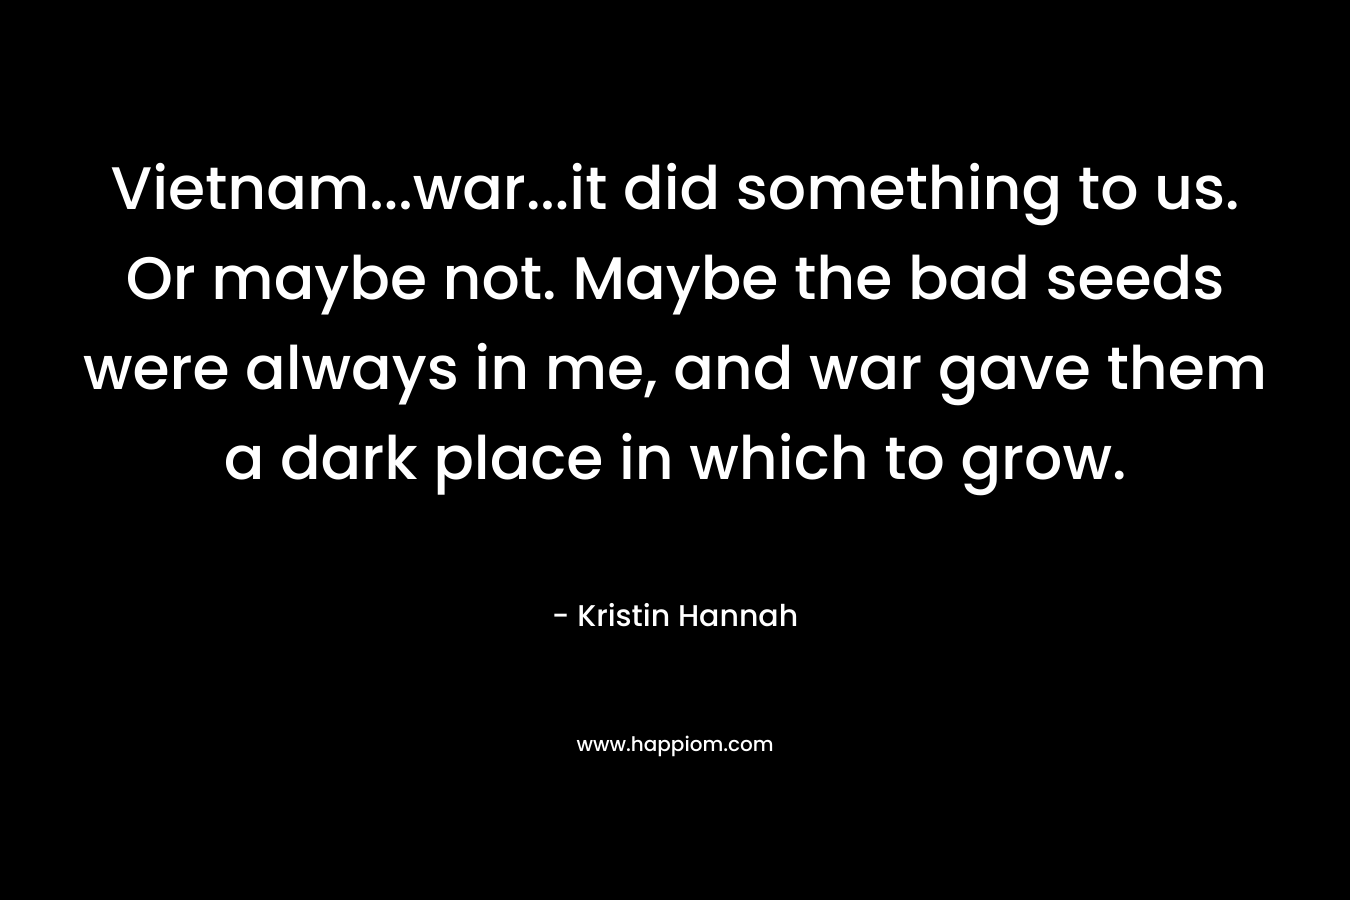 Vietnam...war...it did something to us. Or maybe not. Maybe the bad seeds were always in me, and war gave them a dark place in which to grow.